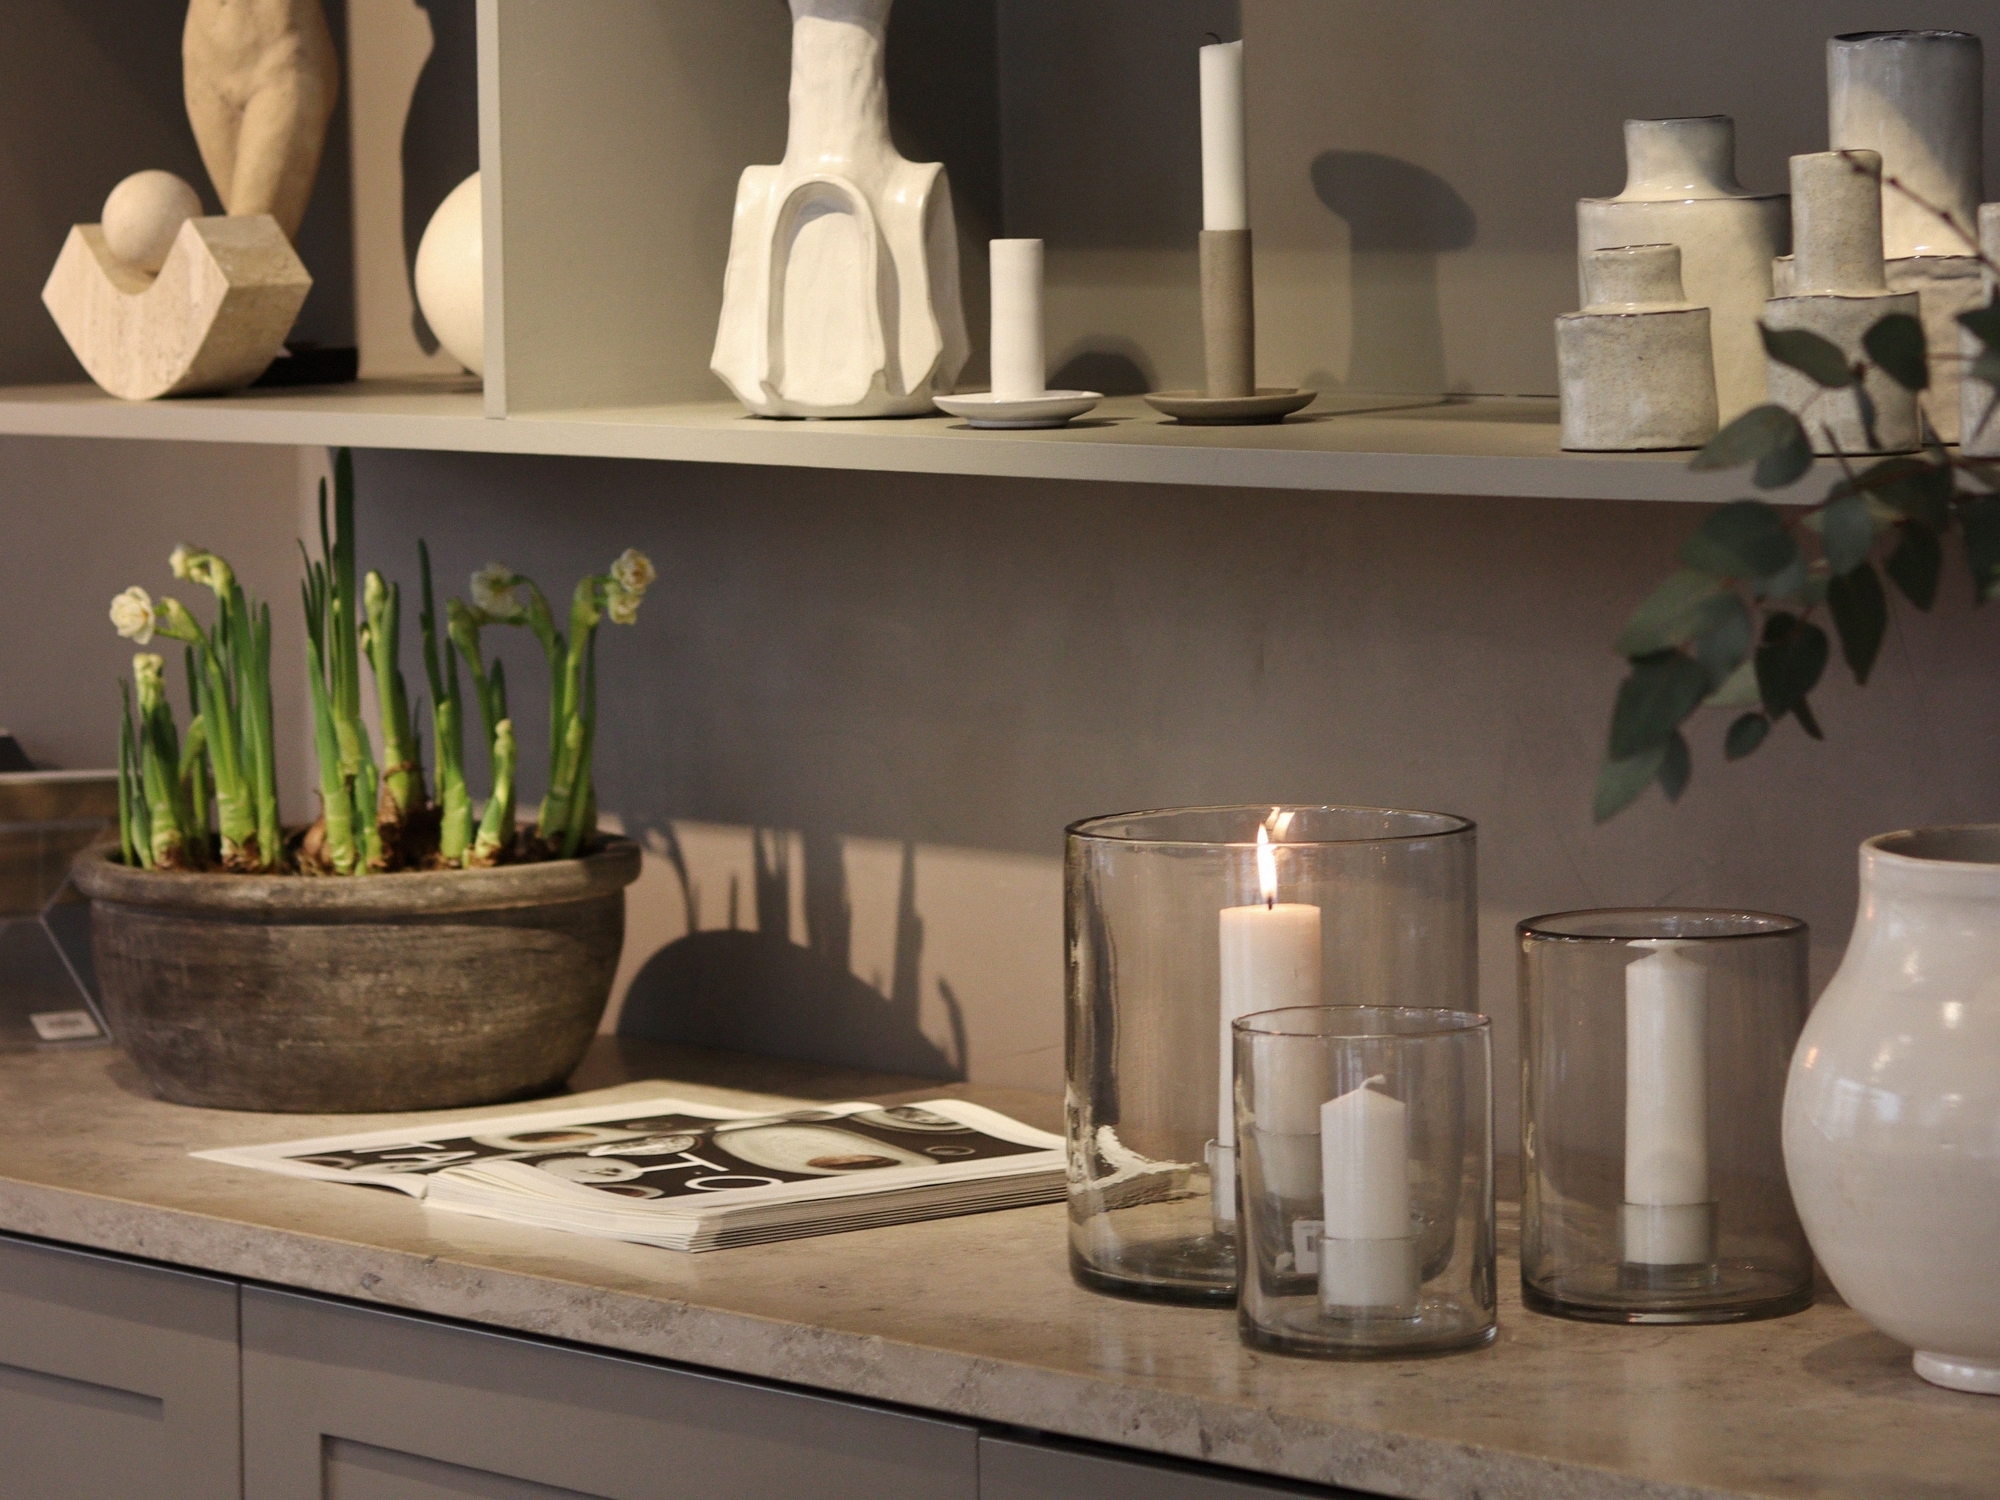 Different candle holders, such as ceramic and glass ones, a book opened on the counter and a vase with plants blooming.